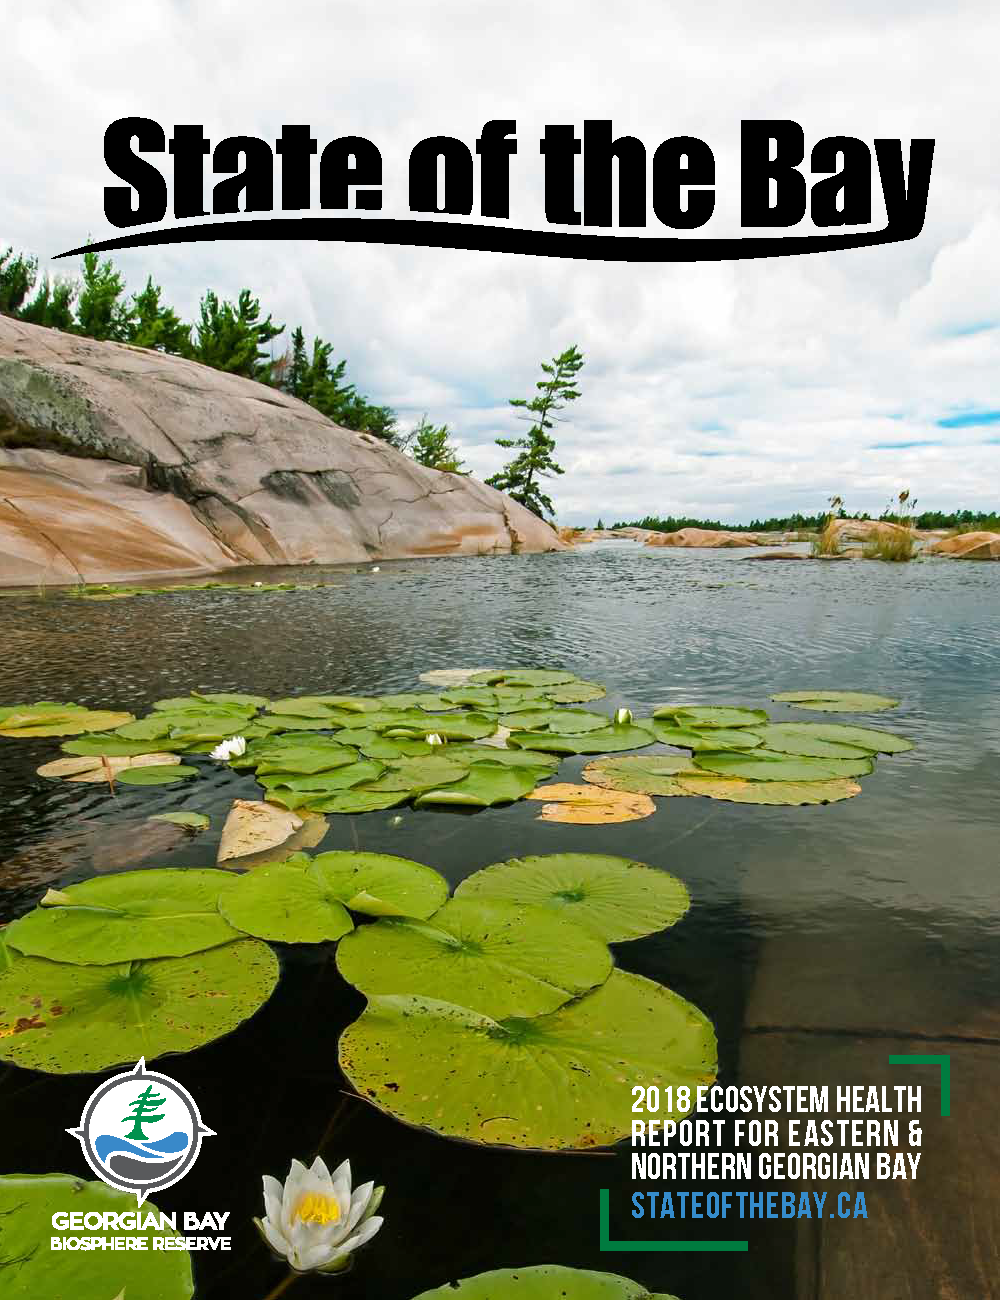 The State of the Bay Project